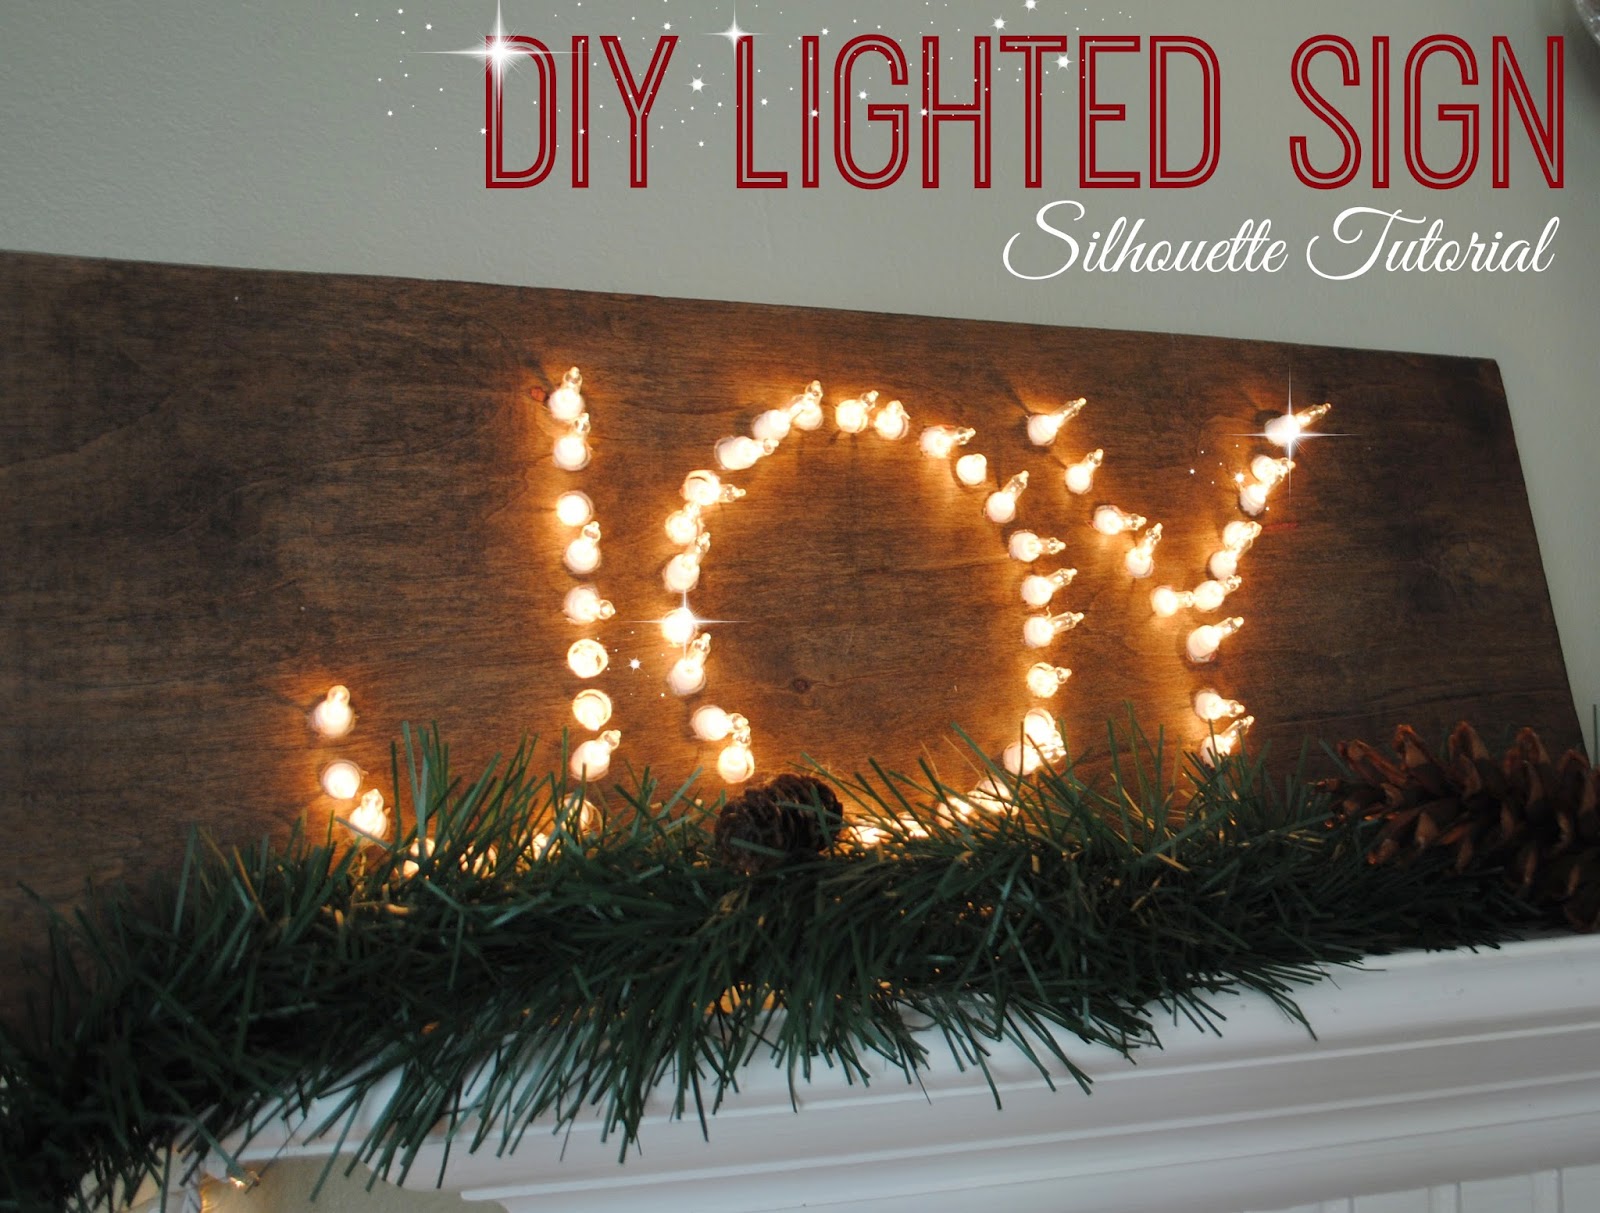 DIY, do it yourself, lighted sign, Silhouette, Silhouette Studio, Silhouette tutorial